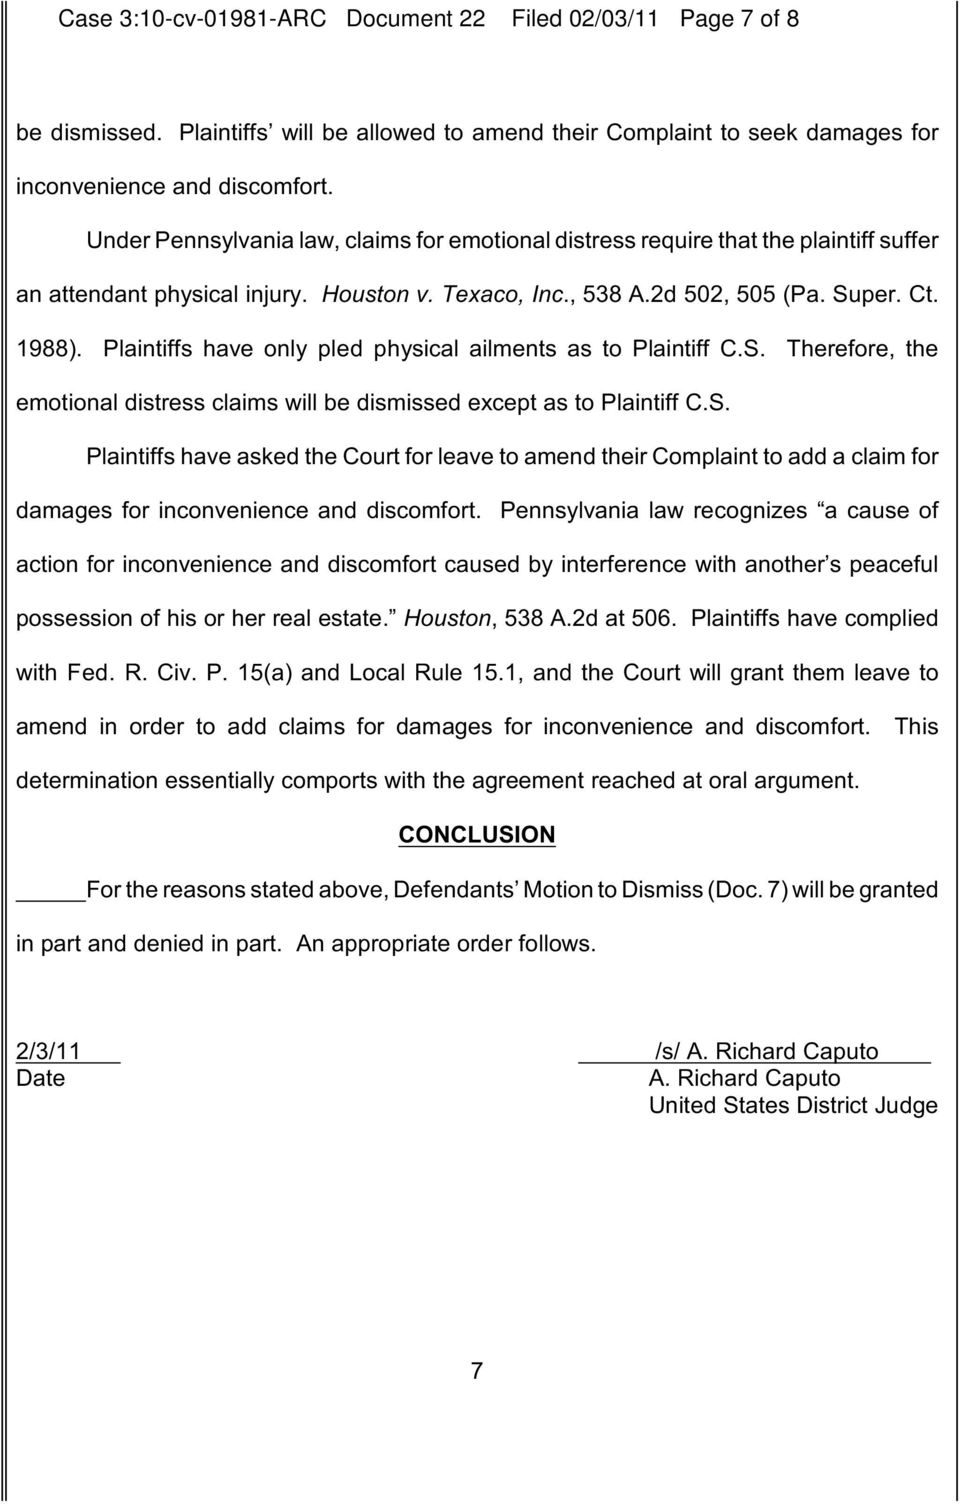 Plaintiffs have only pled physical ailments as to Plaintiff C.S. Therefore, the emotional distress claims will be dismissed except as to Plaintiff C.S. Plaintiffs have asked the Court for leave to amend their Complaint to add a claim for damages for inconvenience and discomfort.